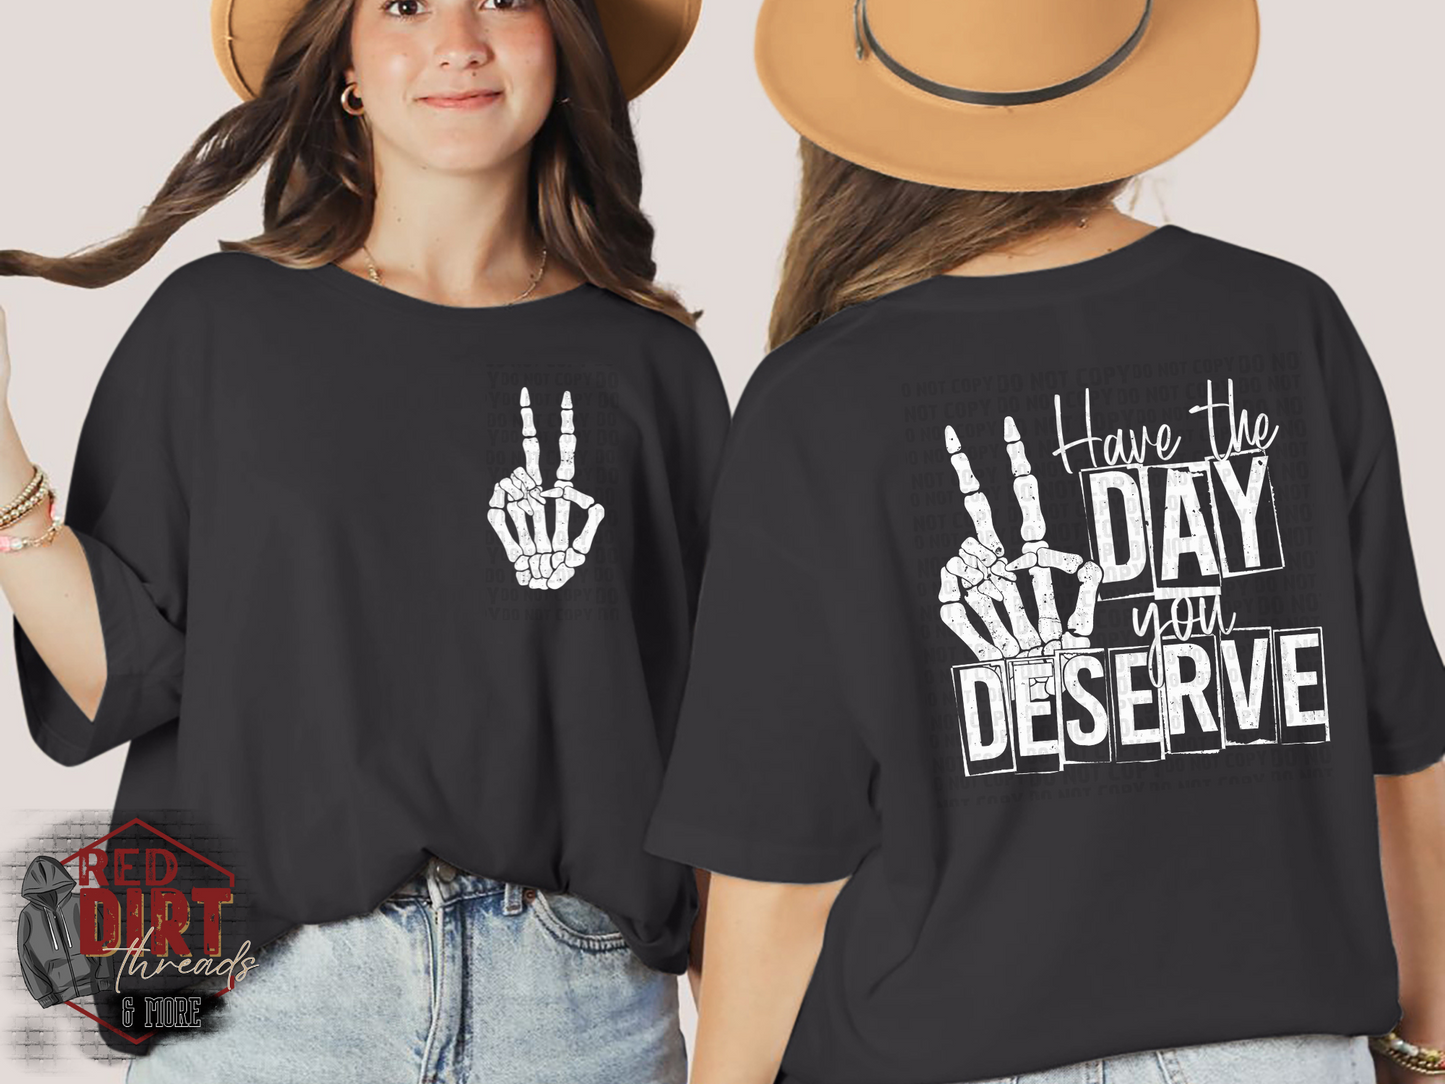 Have The Day You Deserve T-Shirt | Uplifting/Mental Health Shirt | Fast Shipping | Super Soft Shirts for Men/Women